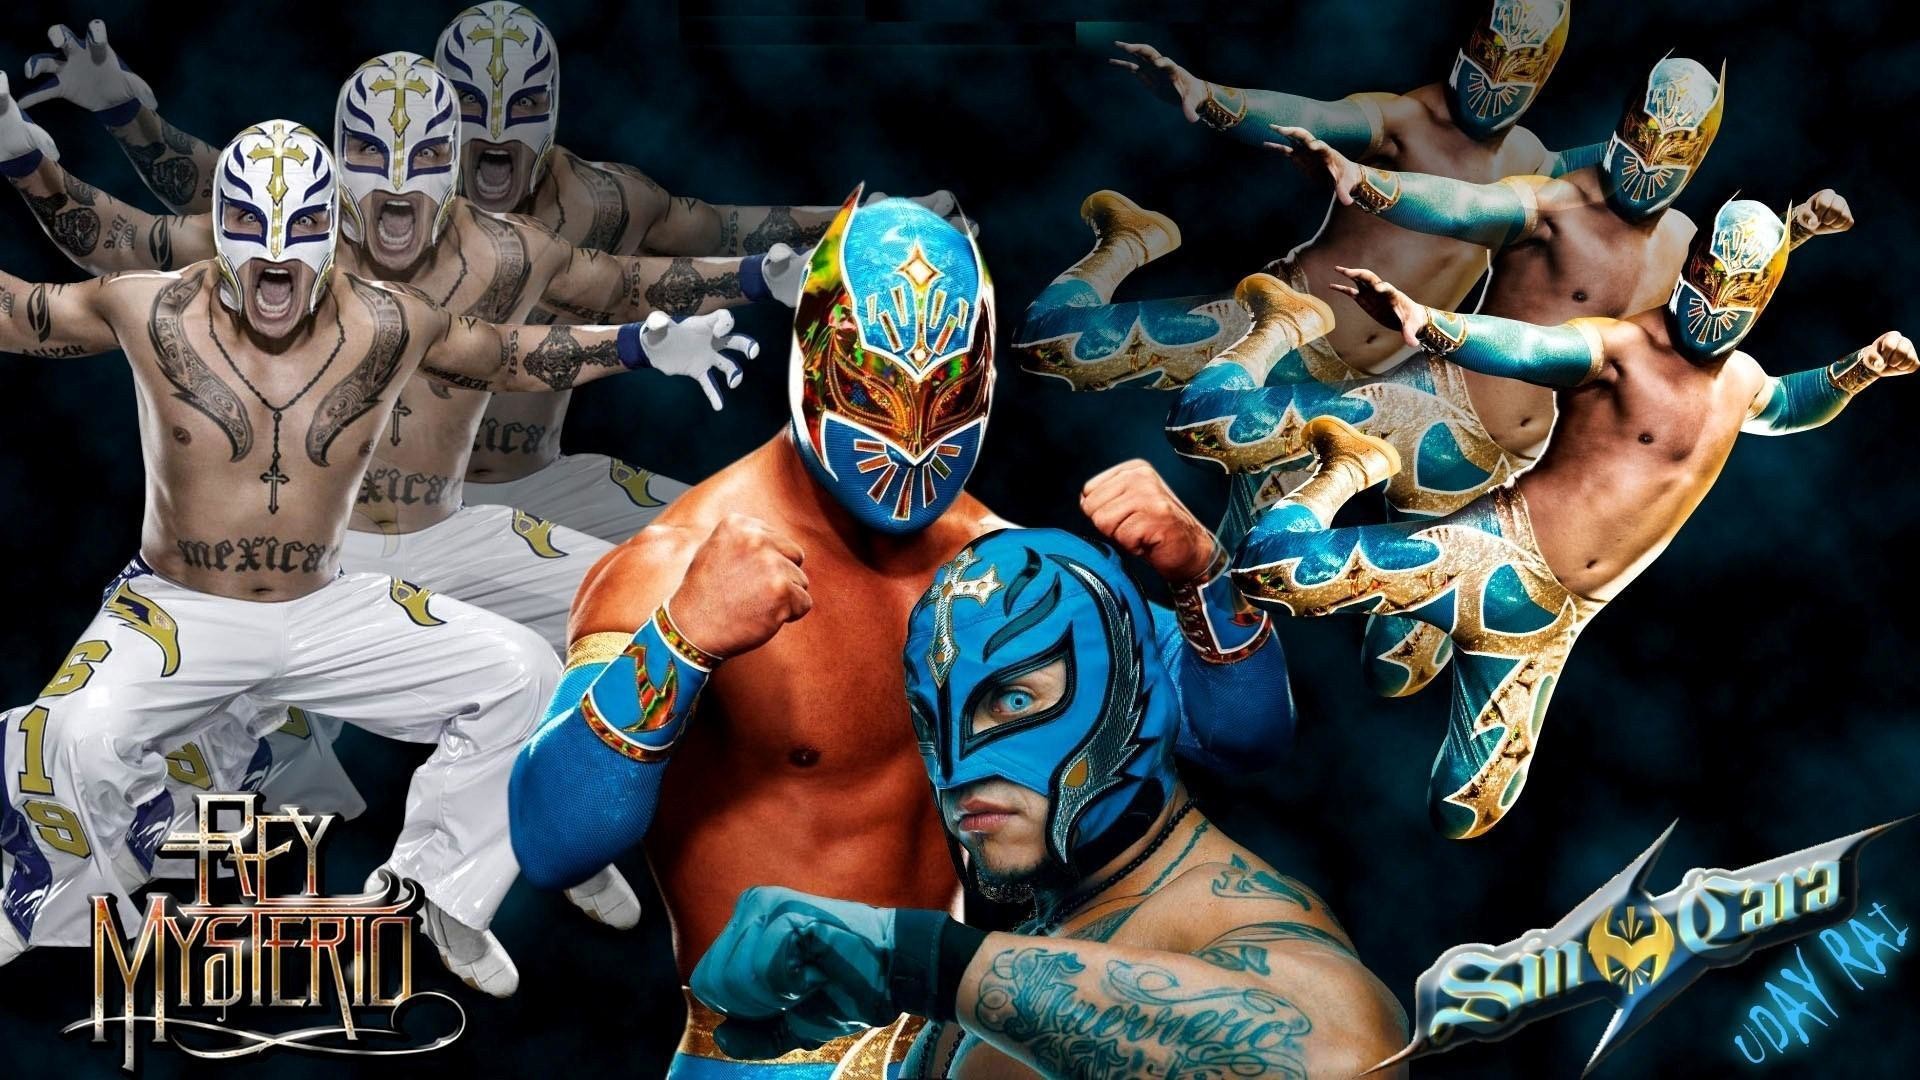 Rey Mysterio 2018 Full HD Wallpaper (47+ pictures)